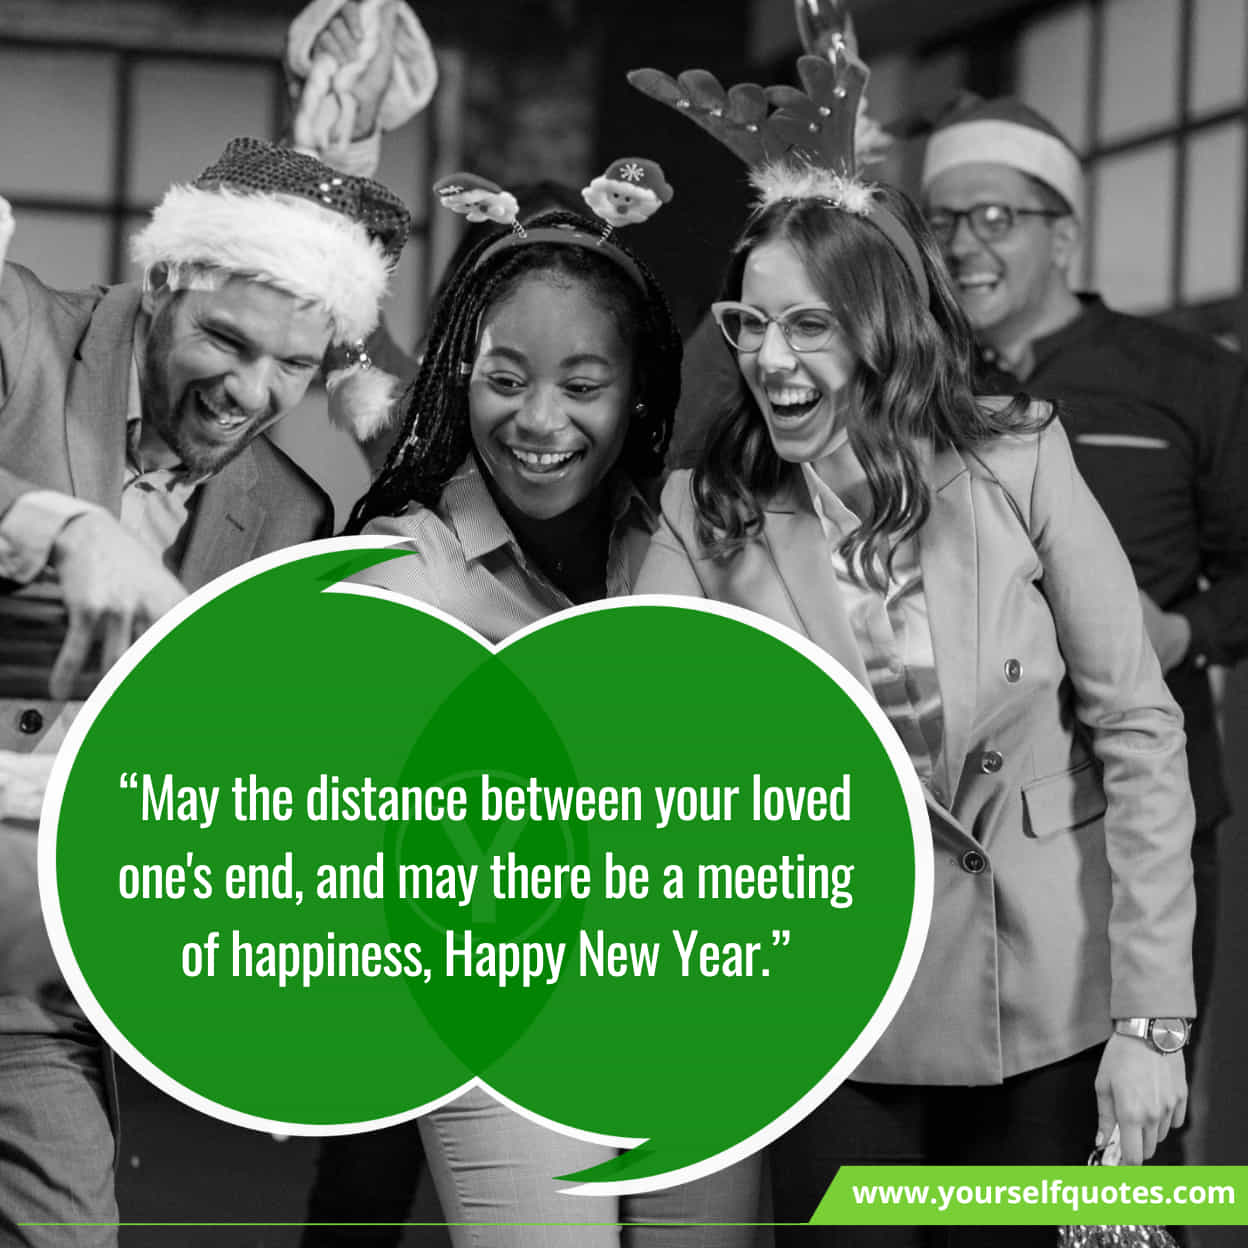 Alluring New Year Greetings About Loved Ones